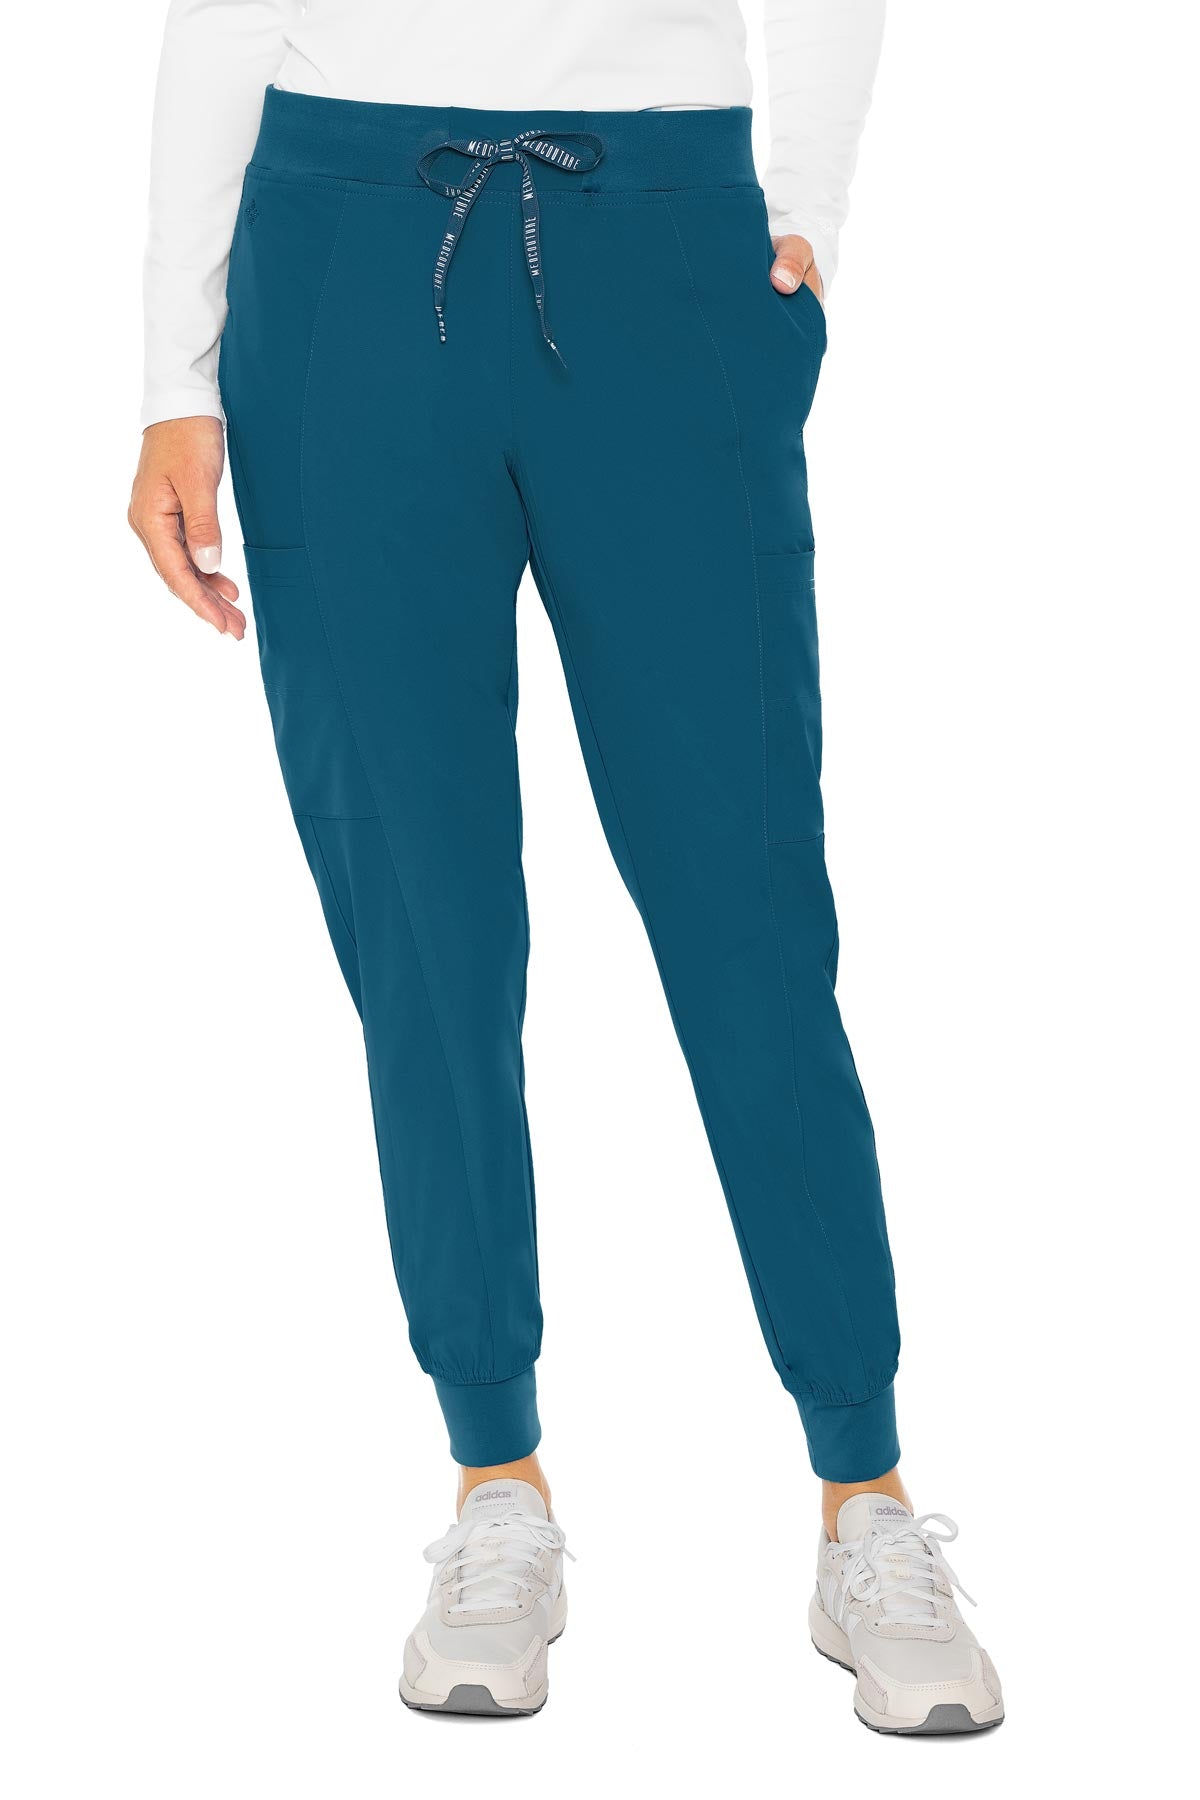 Med Couture Peaches Seamed Jogger Petite Length (XS-XL) – Berani